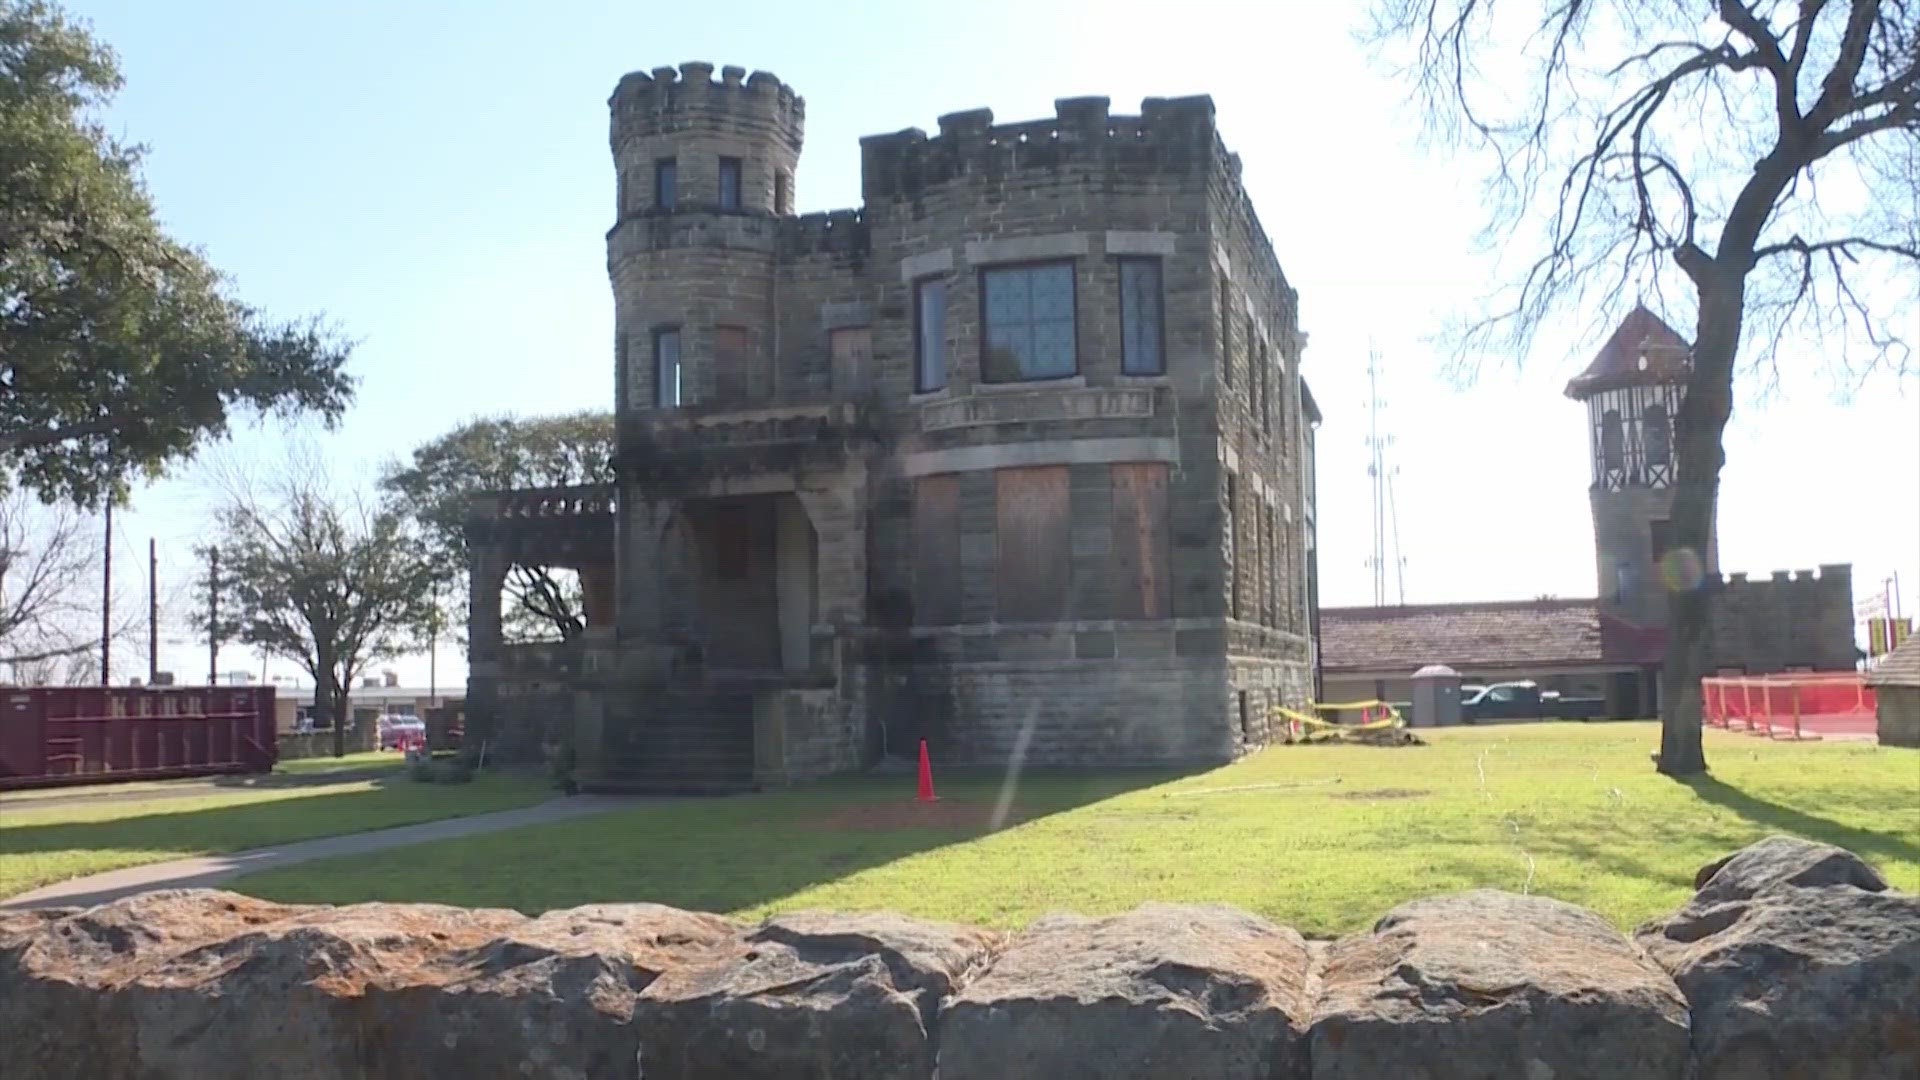 The couple bought the historic Cottonland Castle which was built in 1890 in 2019 and spent three years renovating it.